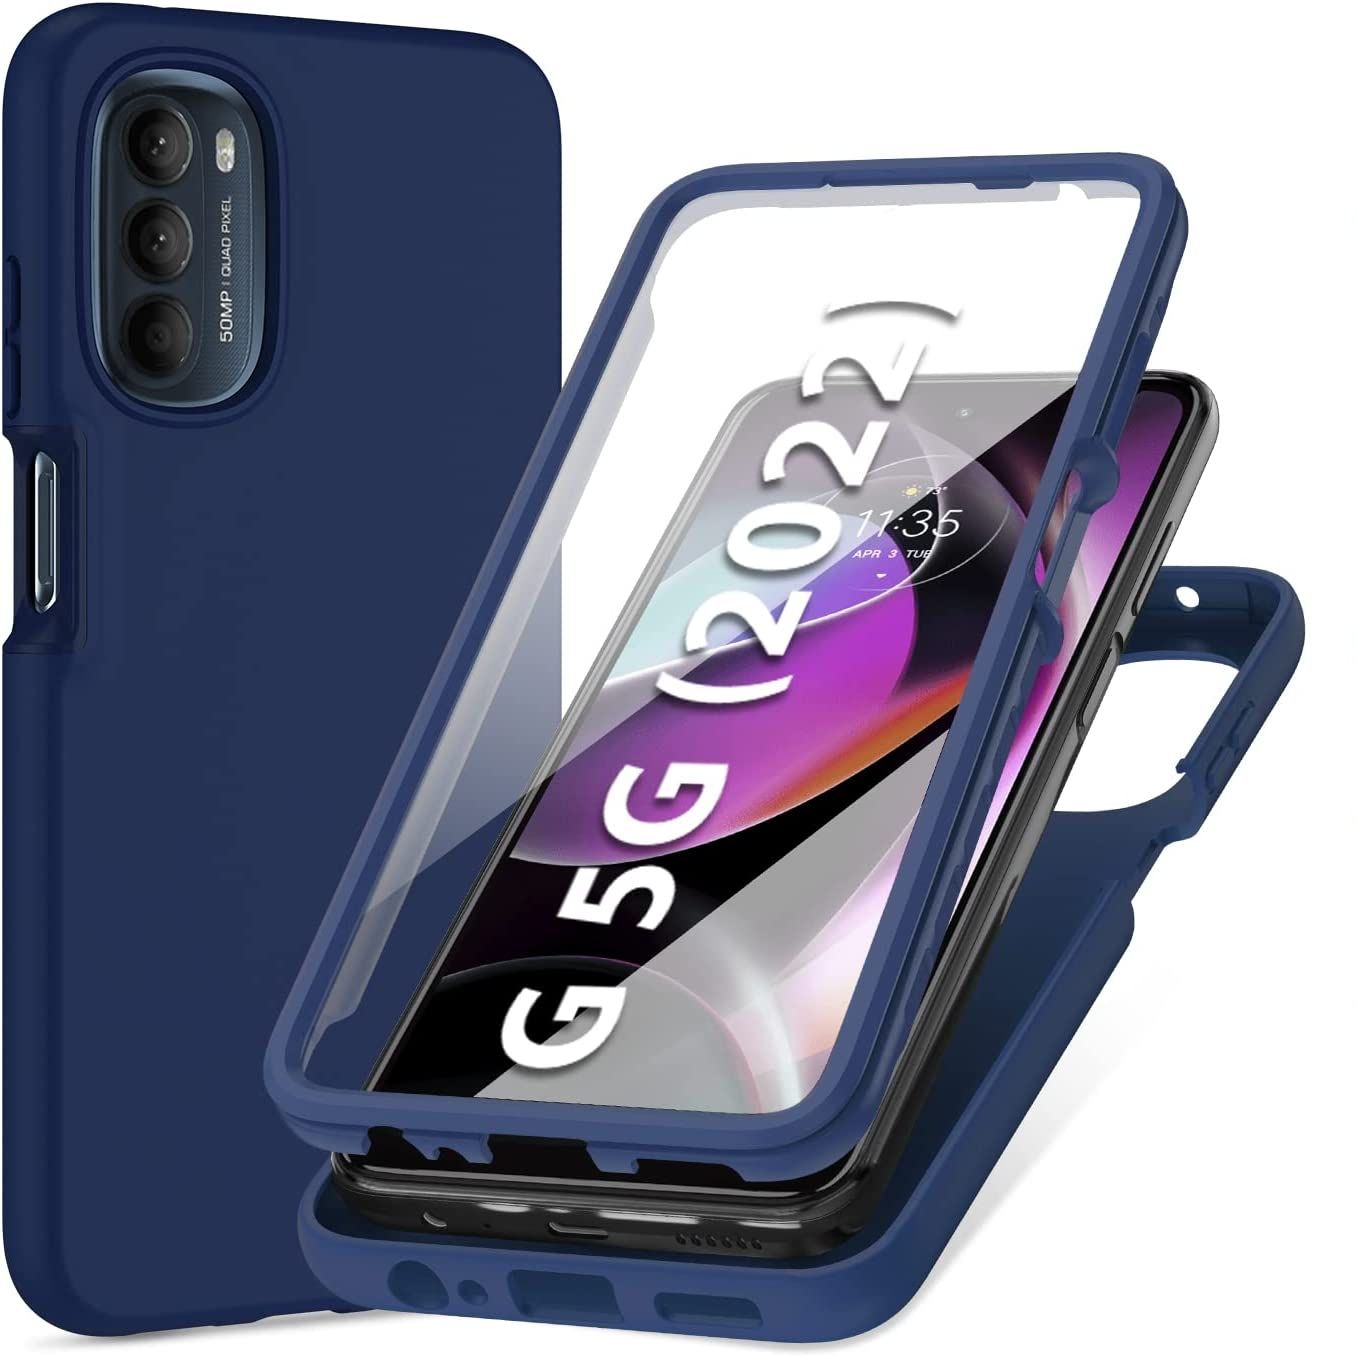 Pujue silicone rugged bumper case for Moto G 5G